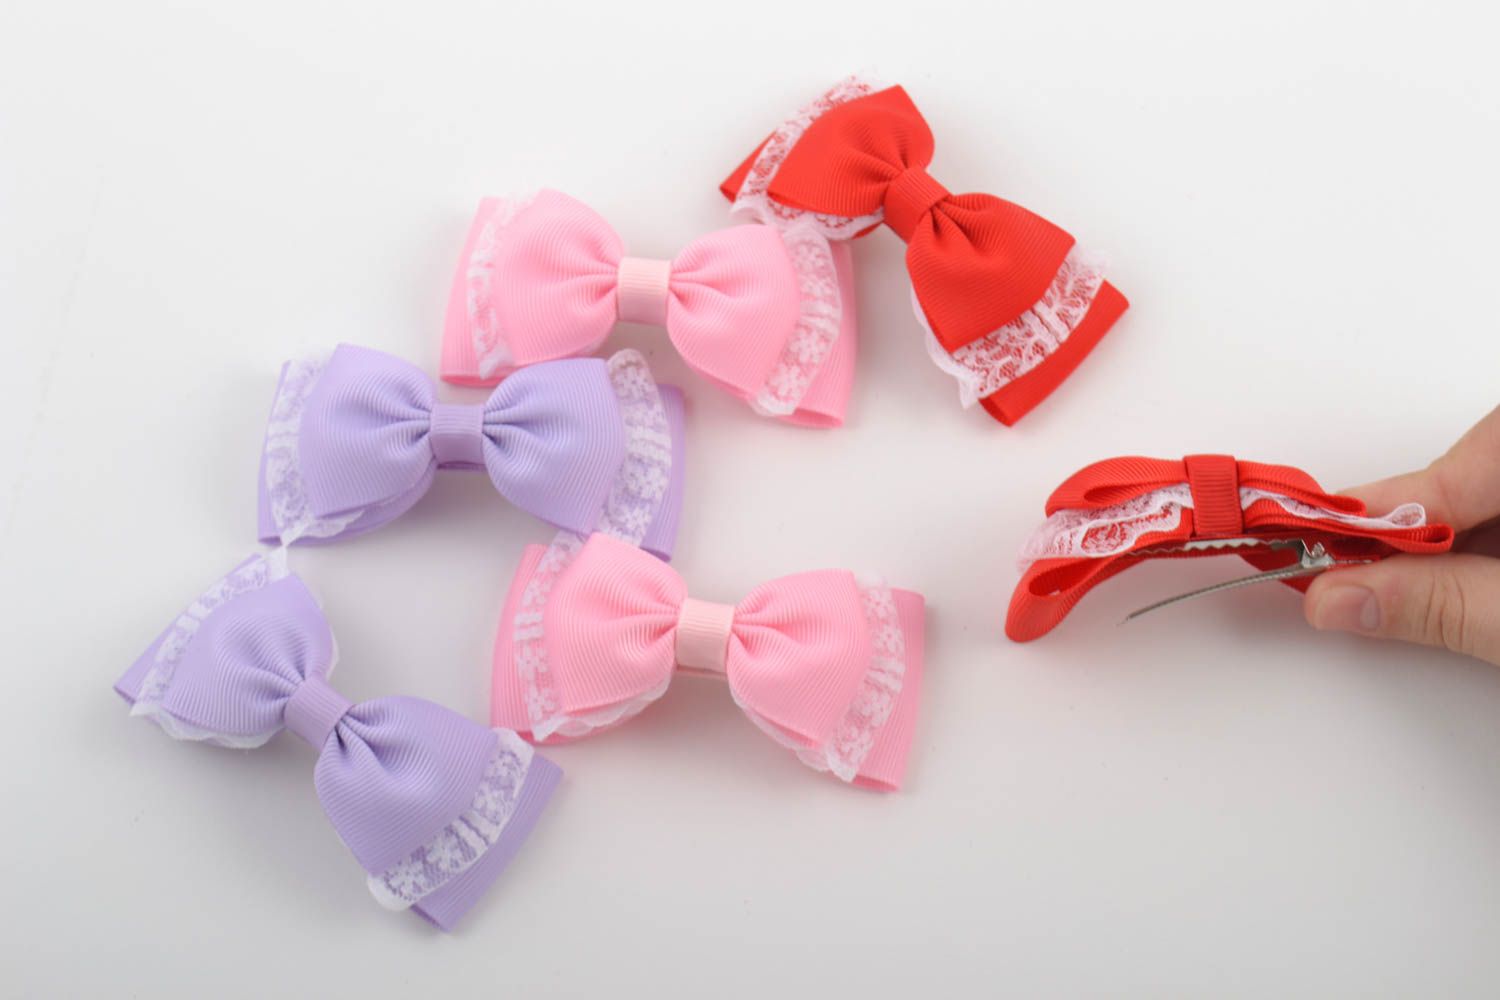 Baby hair bows set of 3 handmade hair clips gifts for baby girl hair decorations photo 5